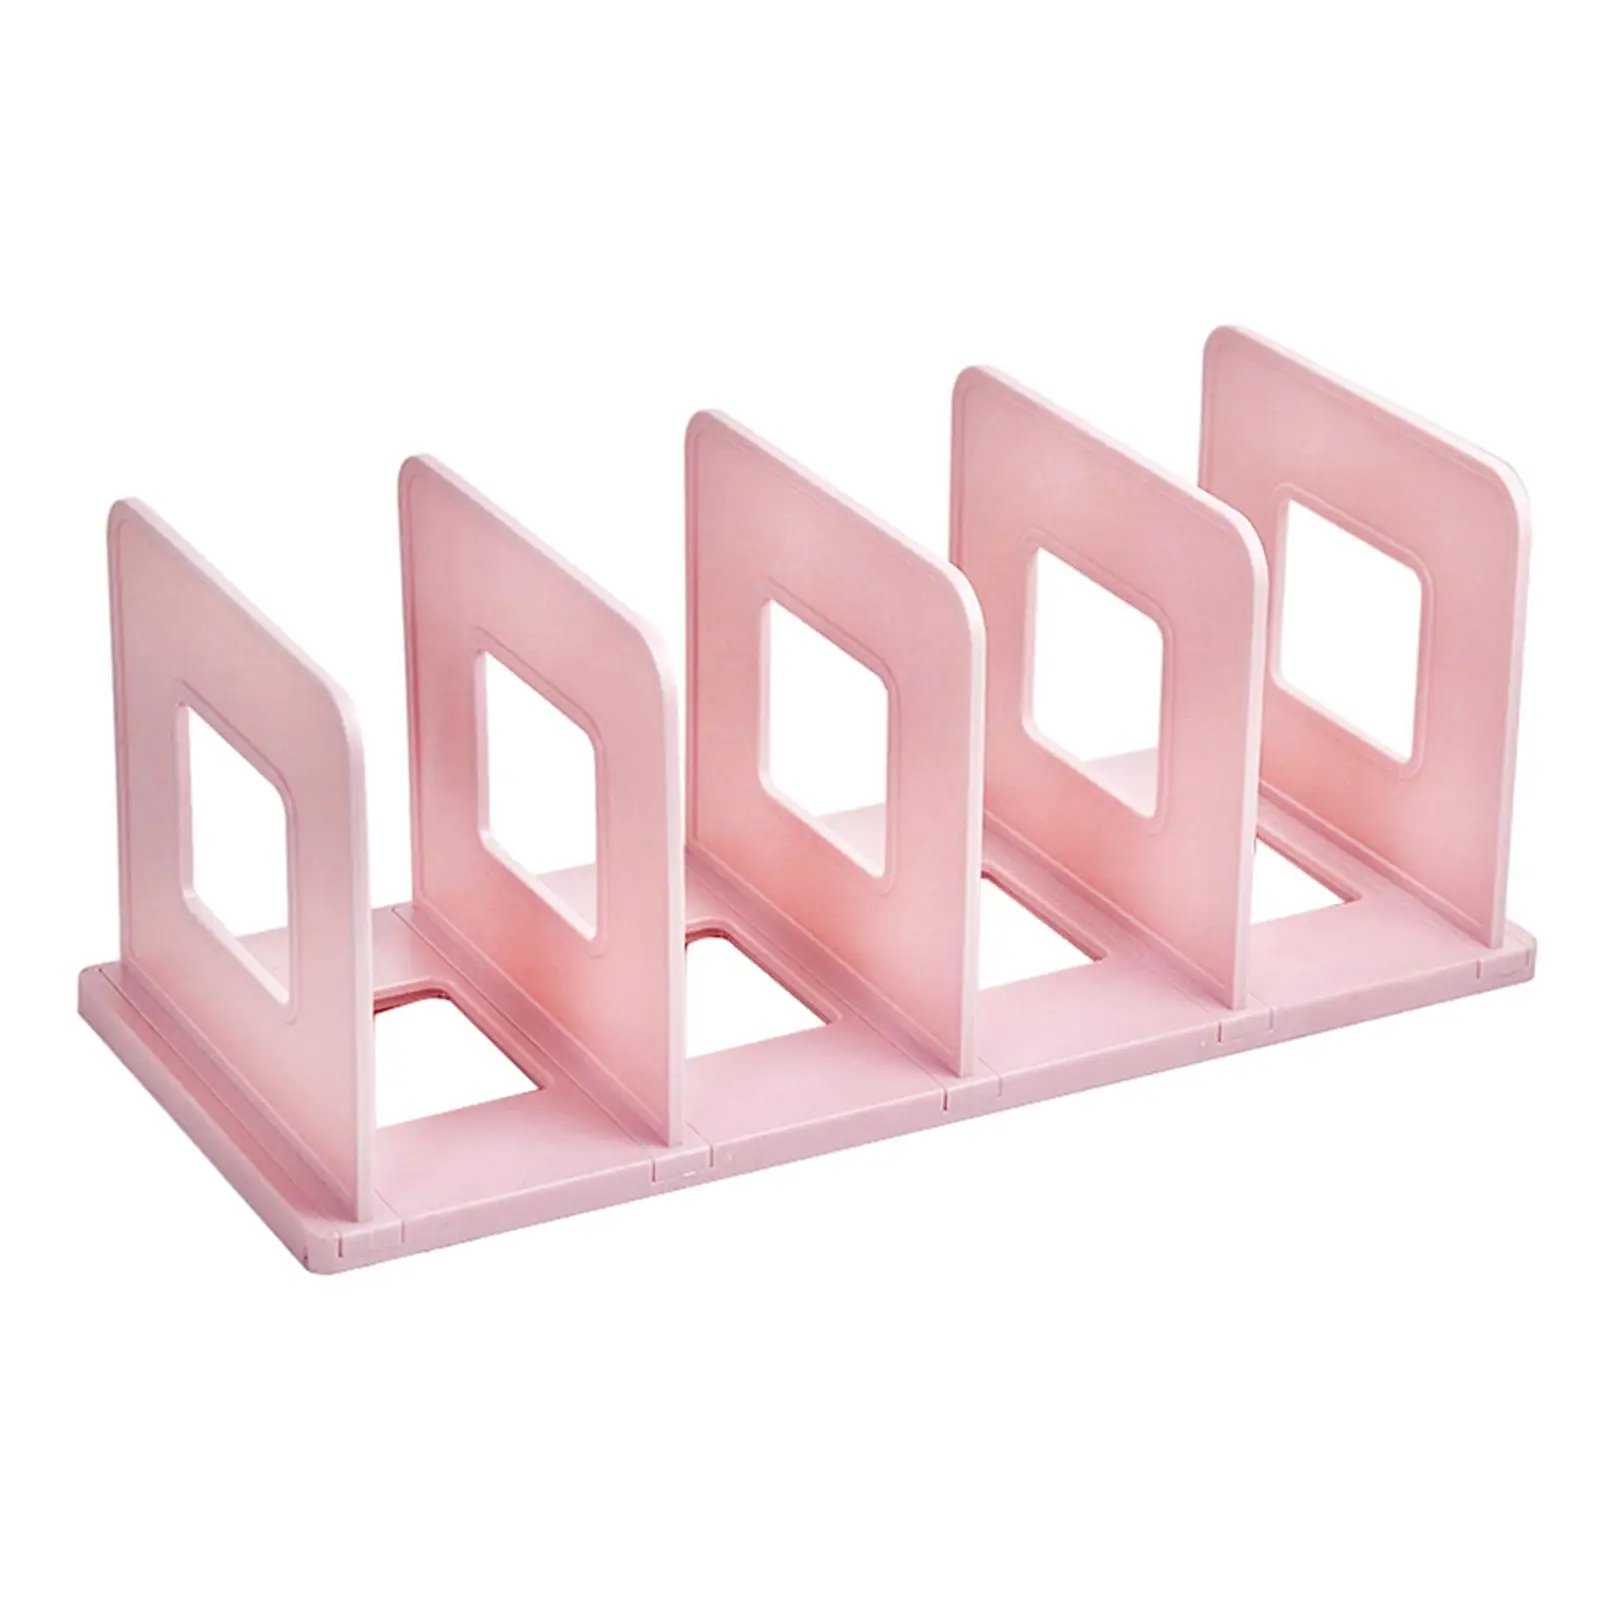 Desktop Book Organizer Office Study Room Table Book Ends Office Accessories Magazine Book Stand File Organizer Book Storage Rack